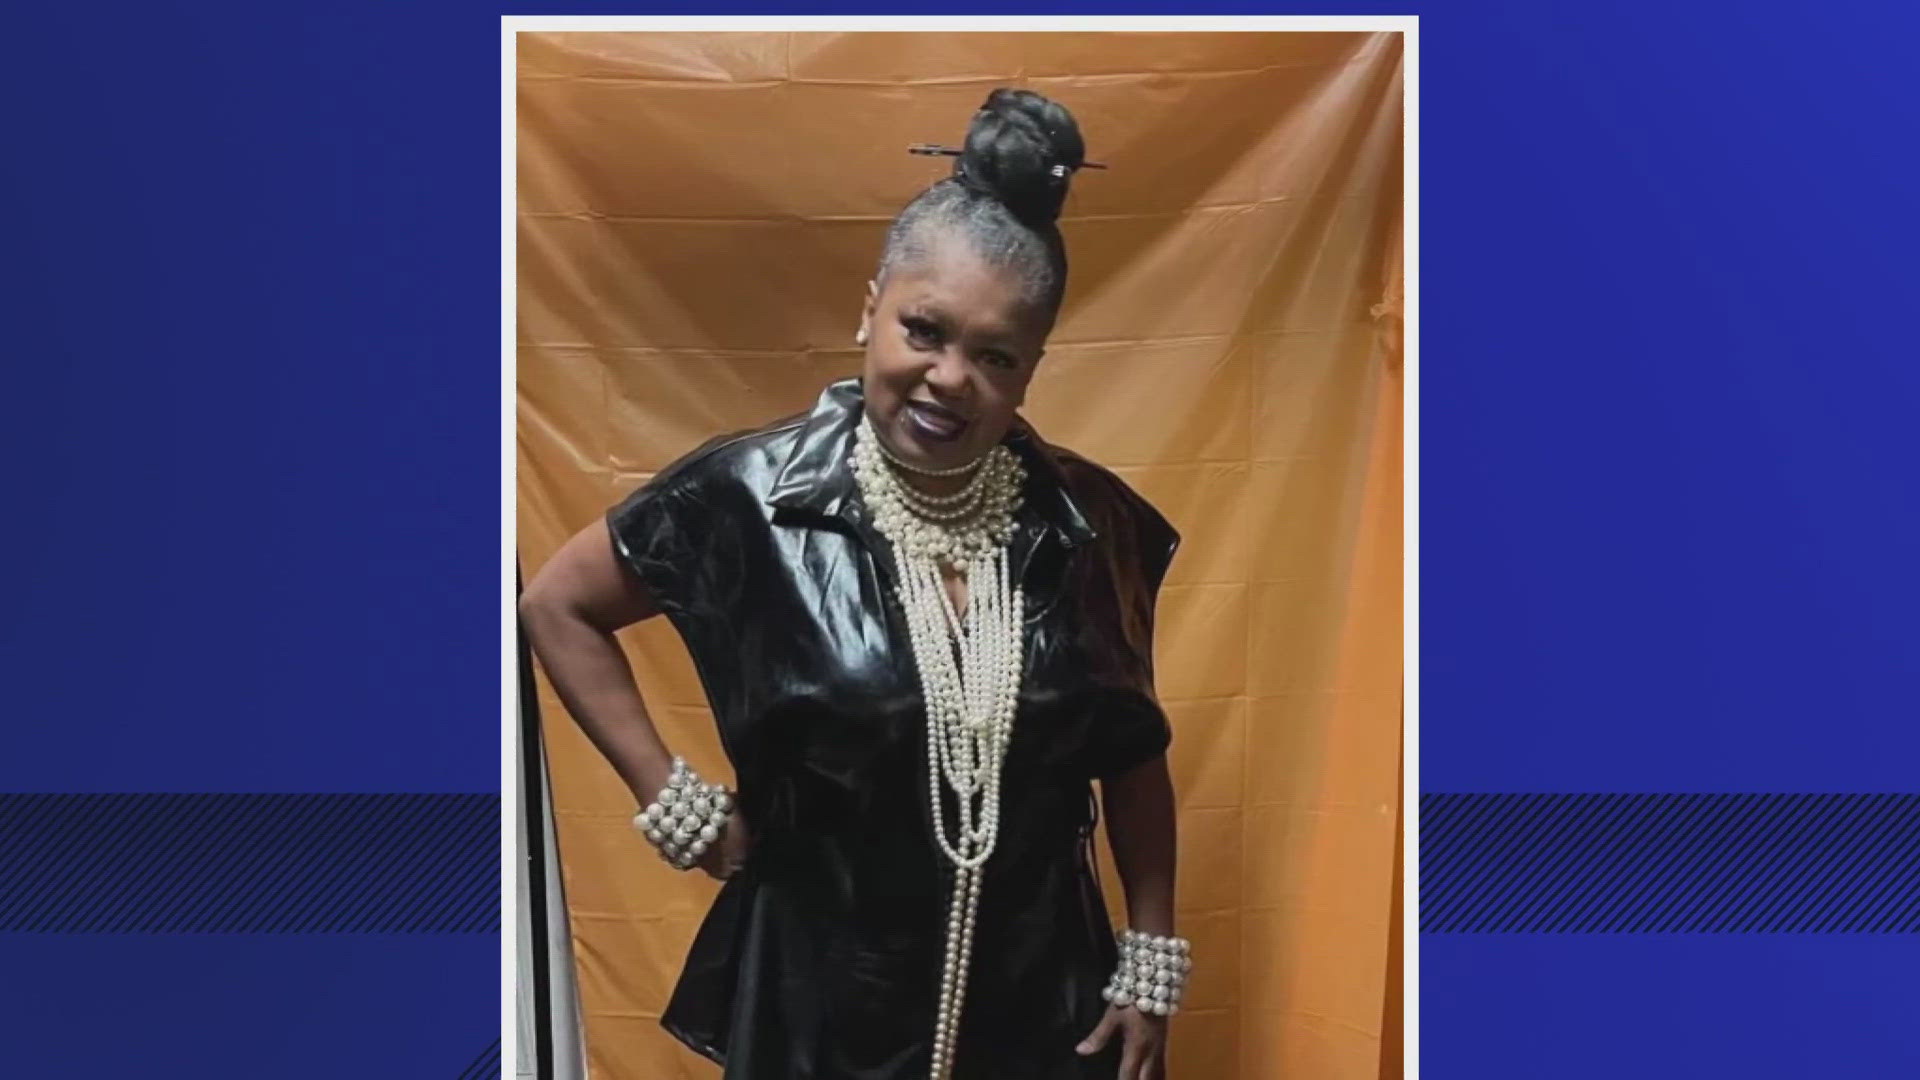 Her body was found after firefighters put out a fire at her apartment in Duncanville.